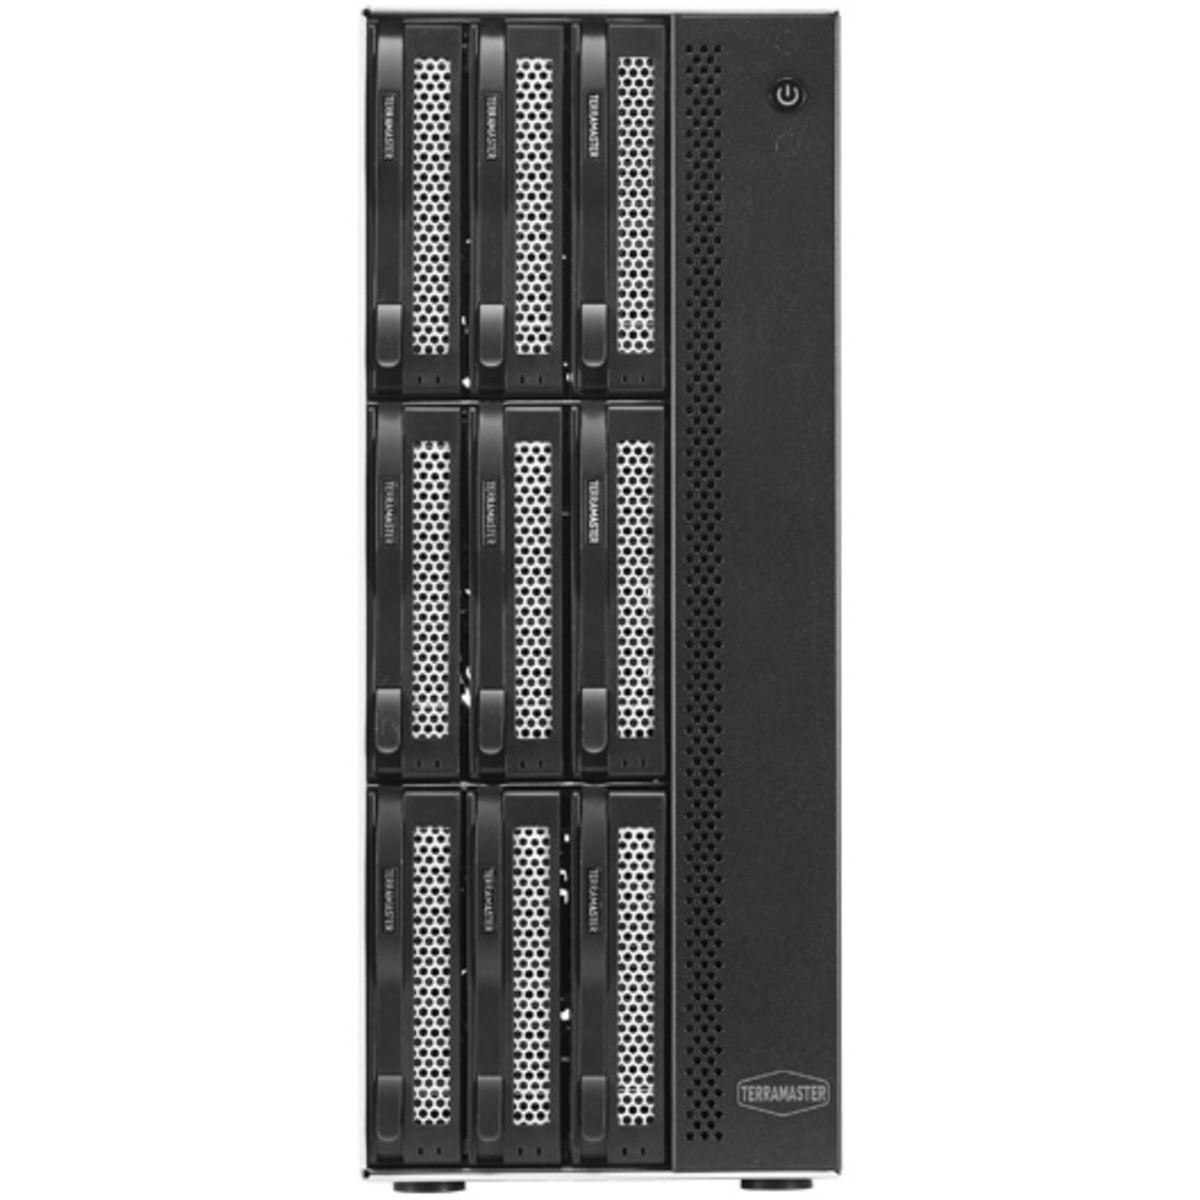 buy $2130 TerraMaster T9-450 9tb Desktop NAS - Network Attached Storage Device 9x1000gb Samsung 870 QVO MZ-77Q1T0 2.5 560/530MB/s SATA 6Gb/s SSD CONSUMER Class Drives Installed - Burn-In Tested - nas headquarters buy network attached storage server device das new raid-5 free shipping usa T9-450